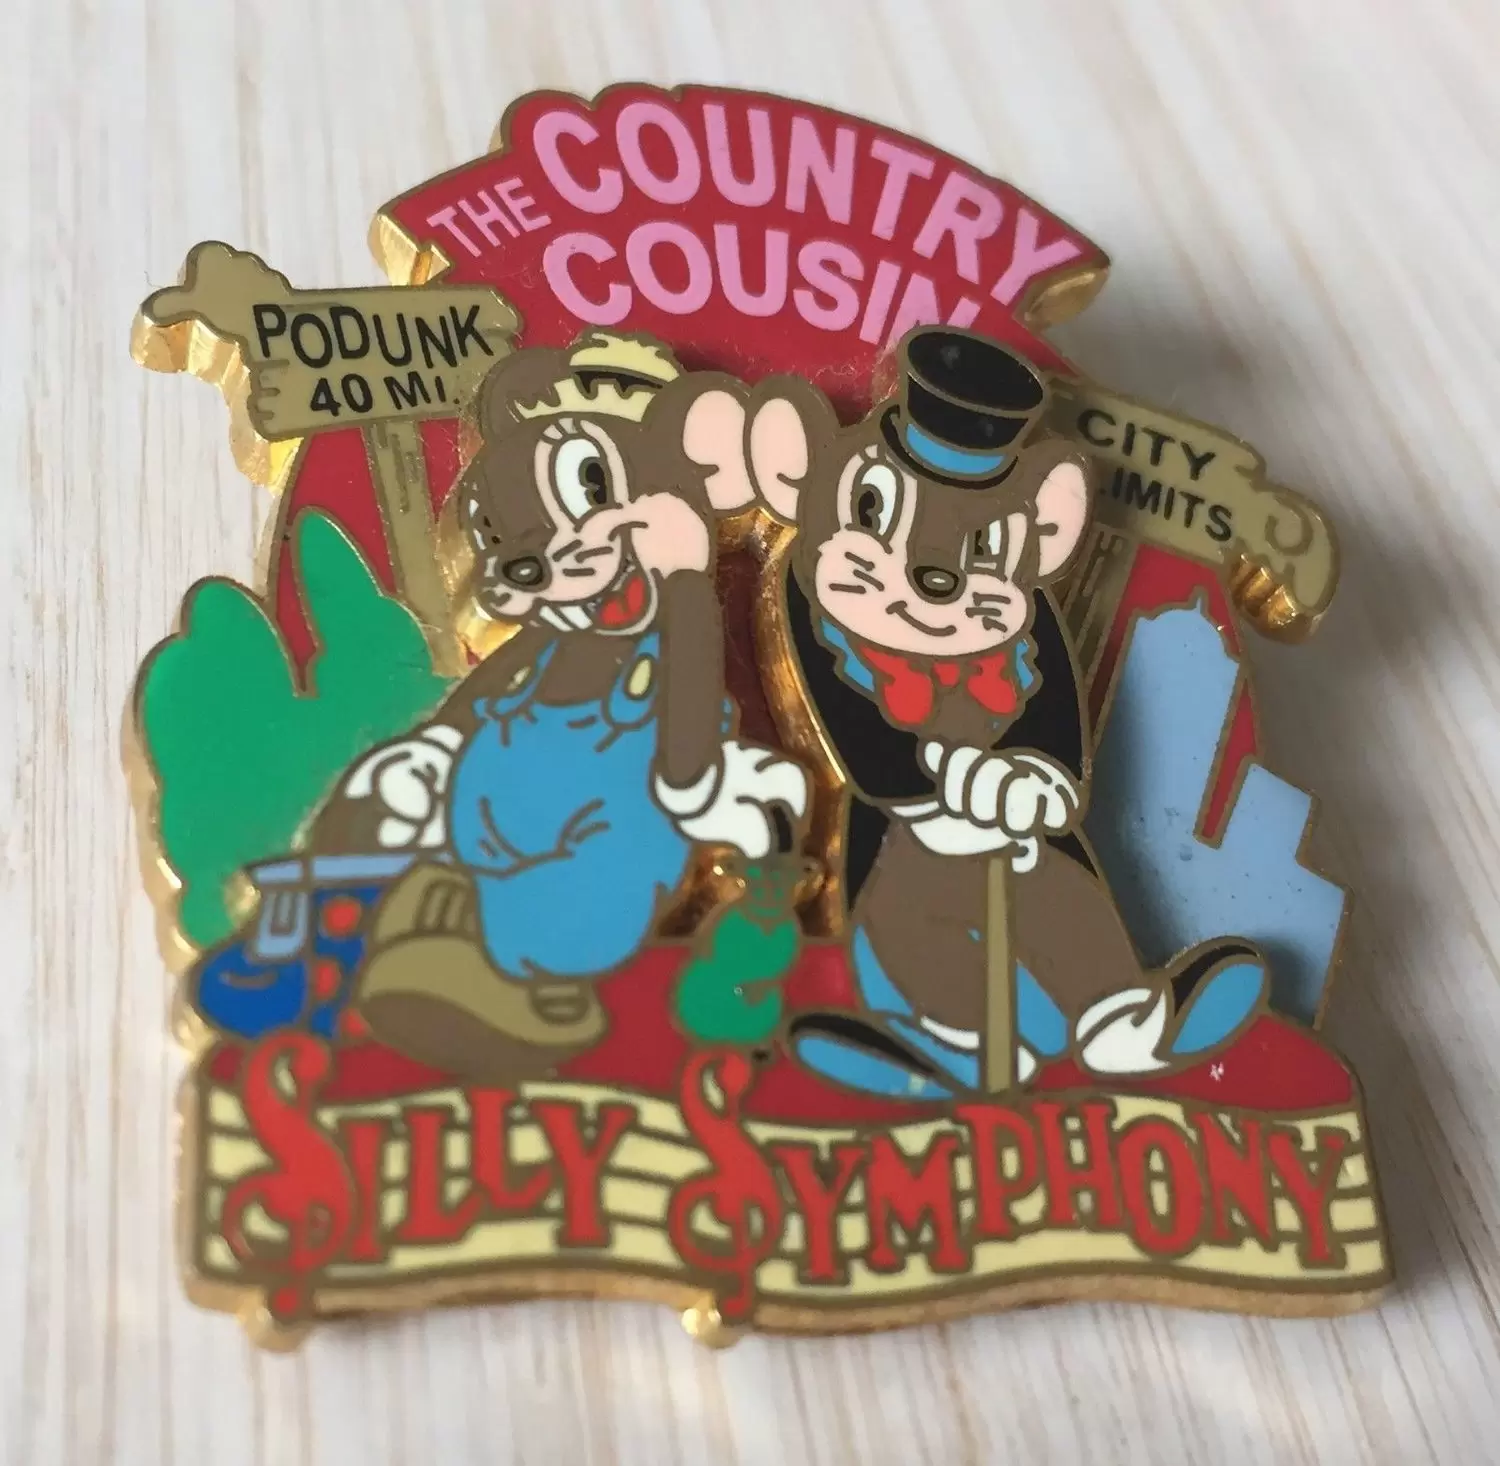 Silly Symphony - The Country Cousin